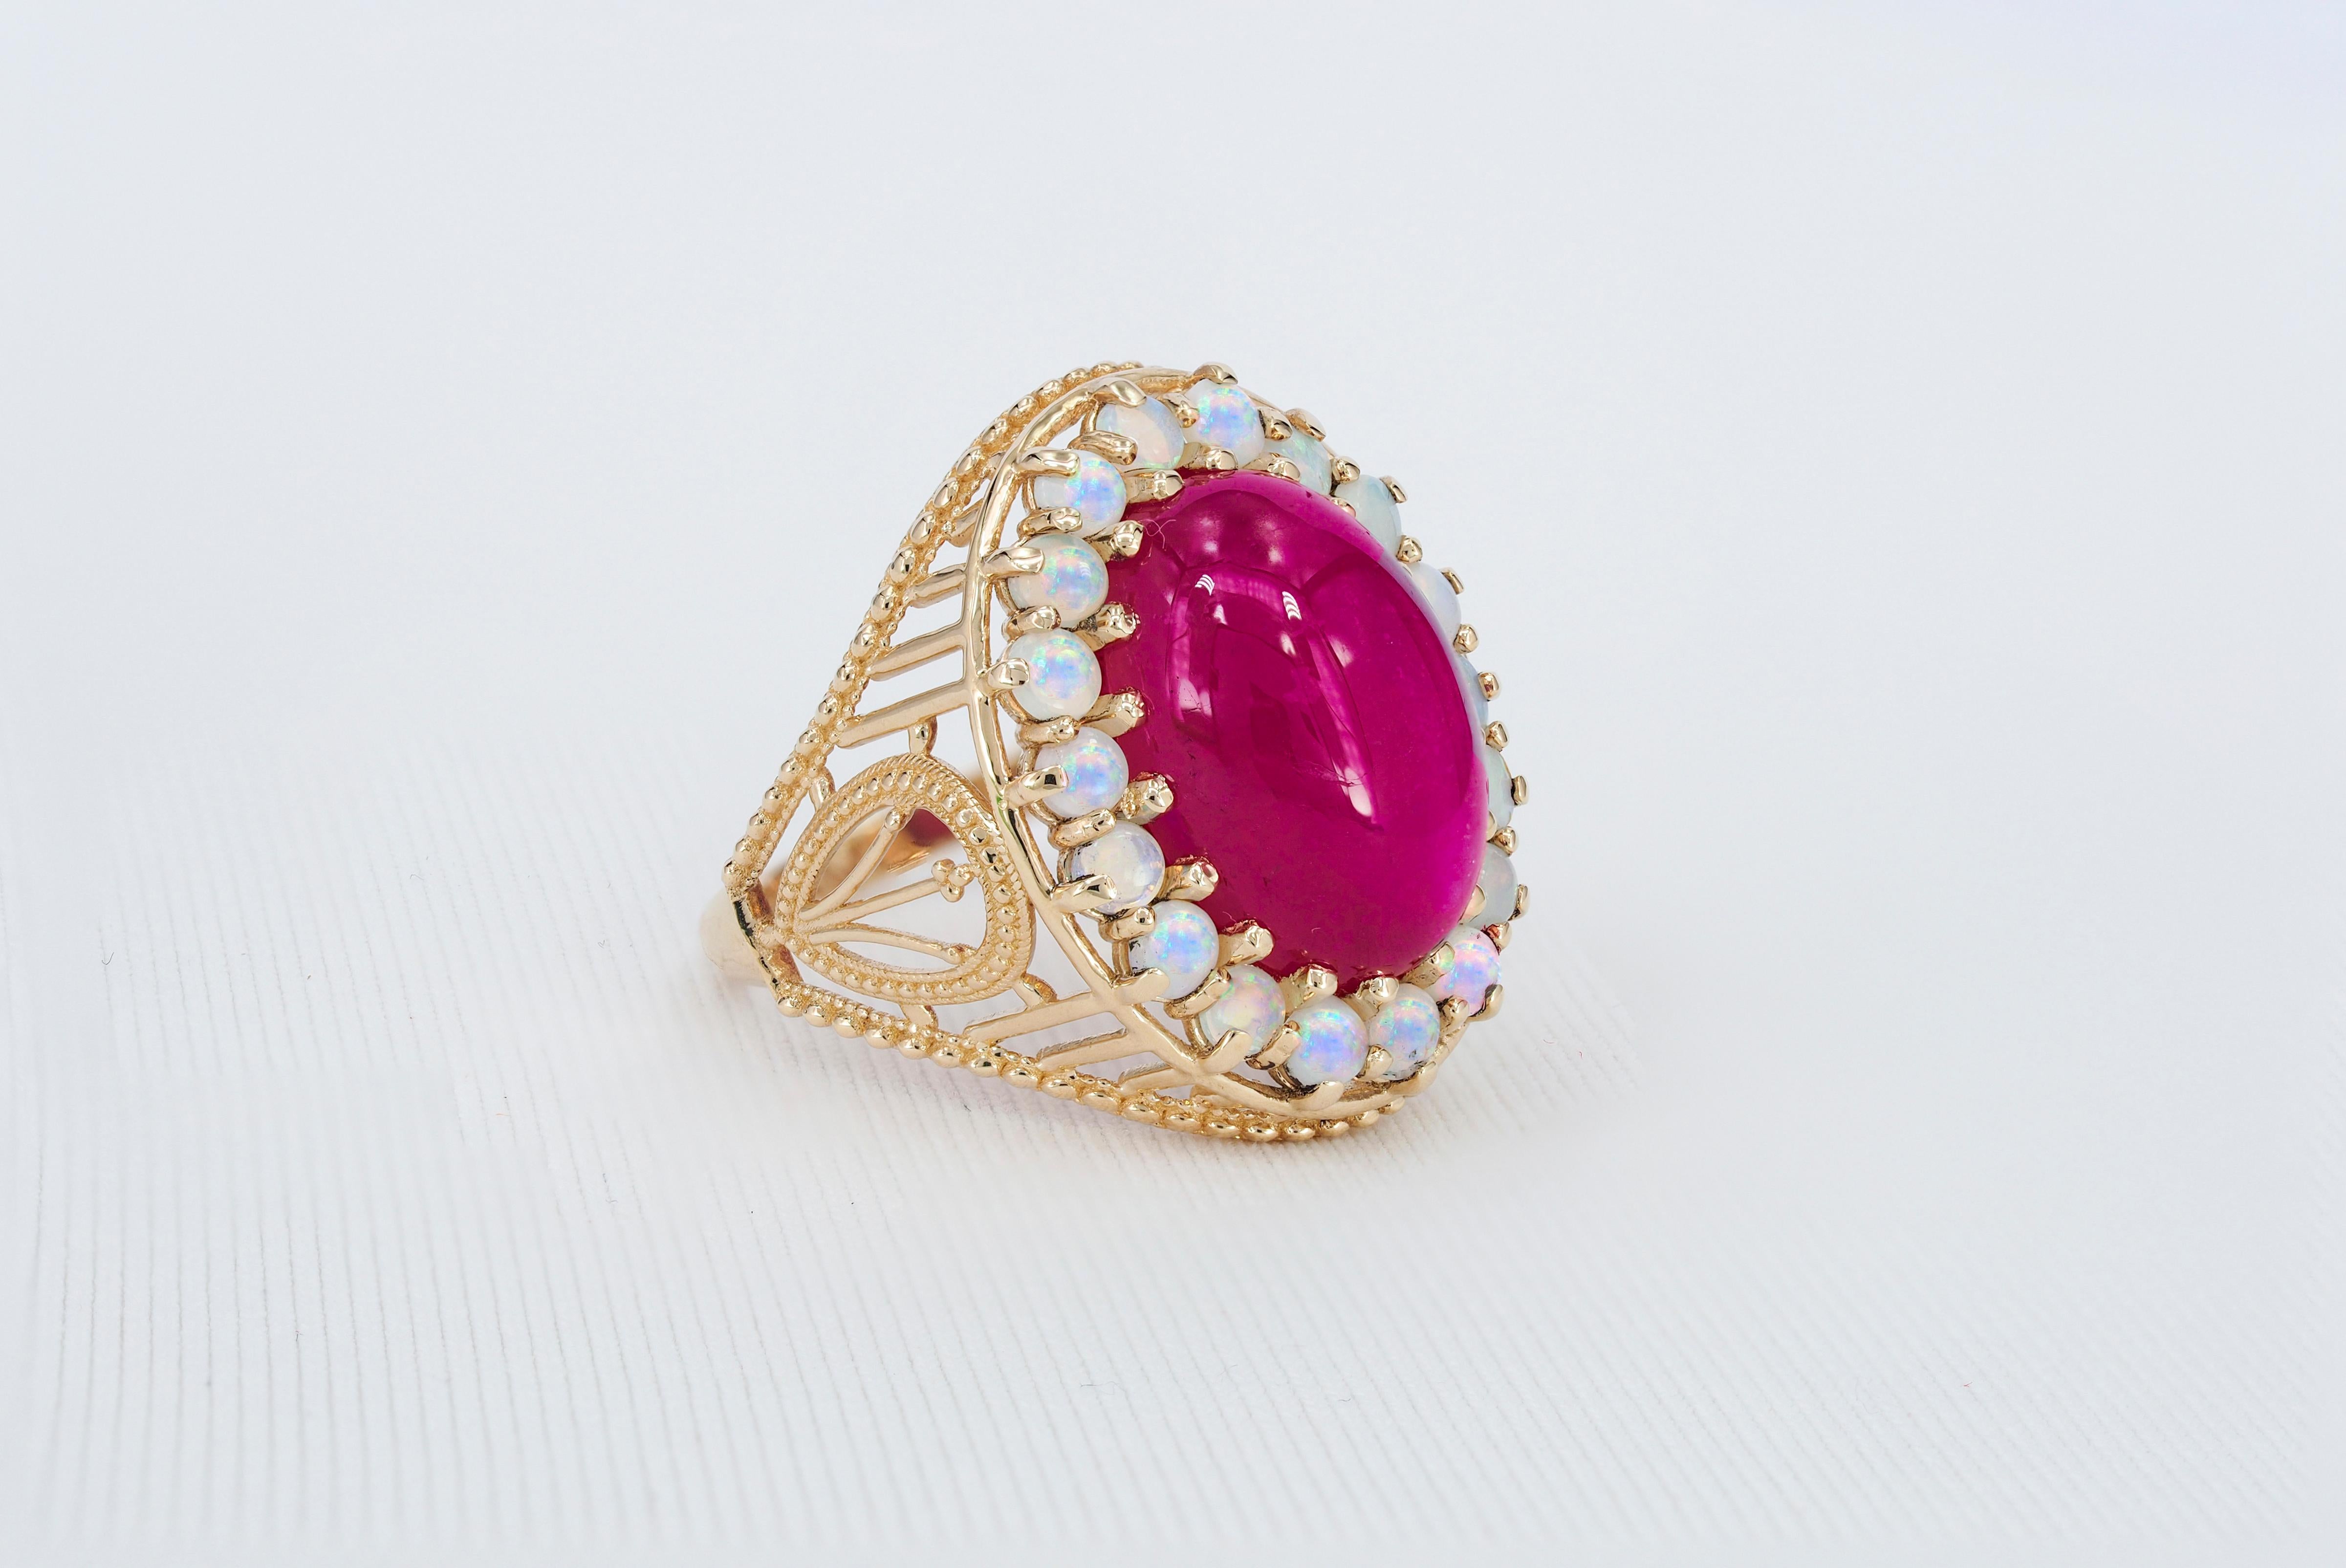 For Sale:  14k Massive Gold Ring with Cabochon Ruby and Opals, Vintage Inspired Ring 4